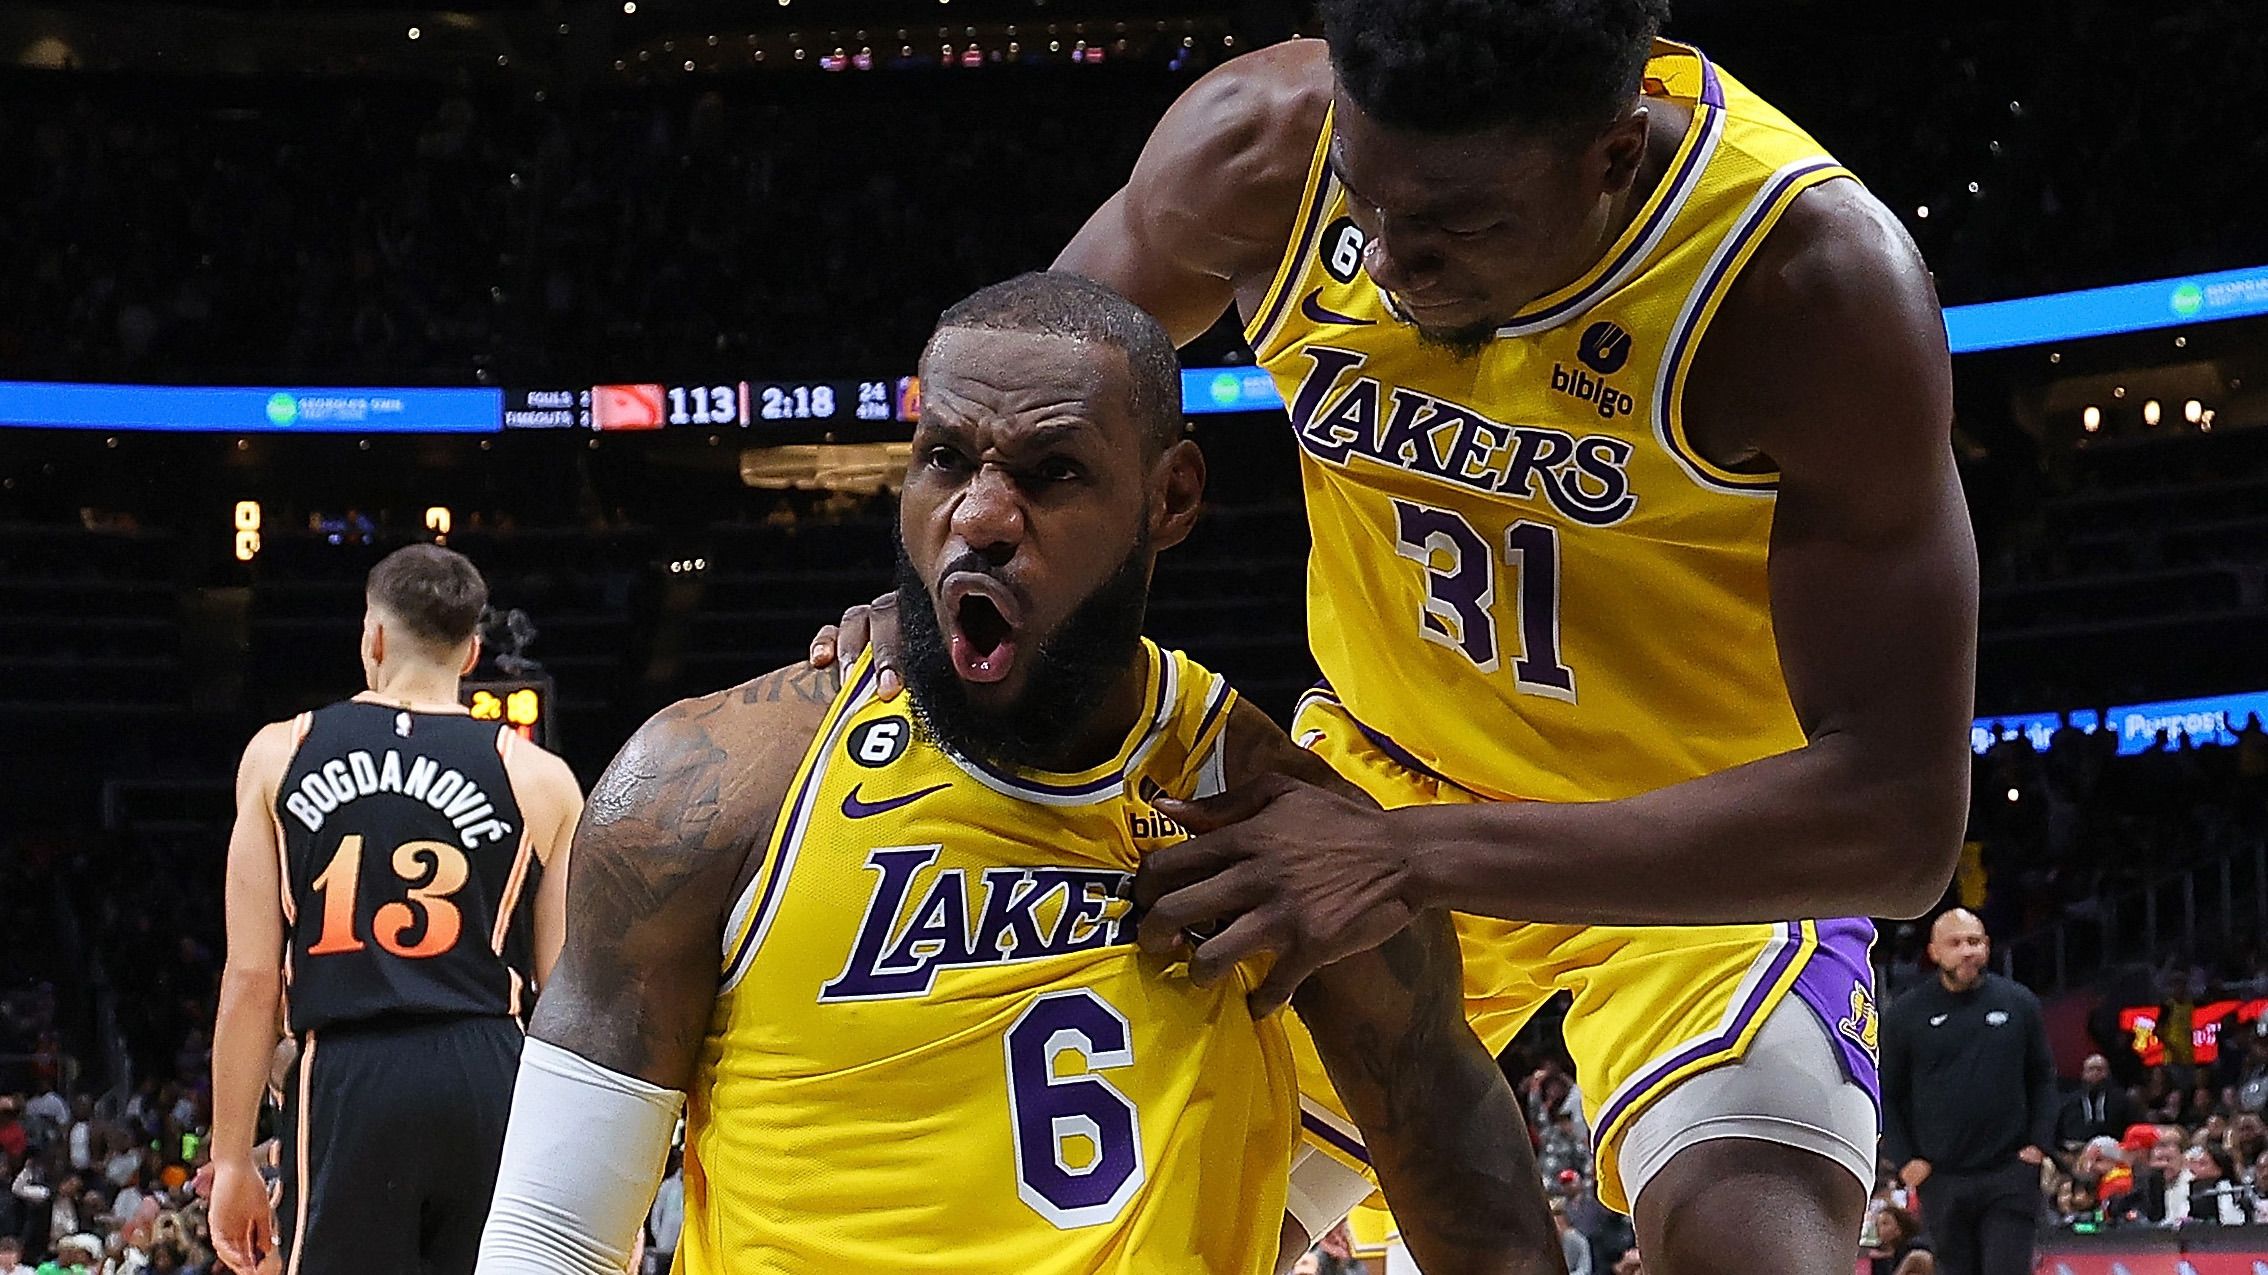 LeBron James #6 of the Los Angeles Lakers reacts with Thomas Bryant #31 after drawing a foul on a basket against the Atlanta Hawks during the fourth quarter at State Farm Arena on December 30, 2022 in Atlanta, Georgia. (Photo by Kevin C. Cox/Getty Images)